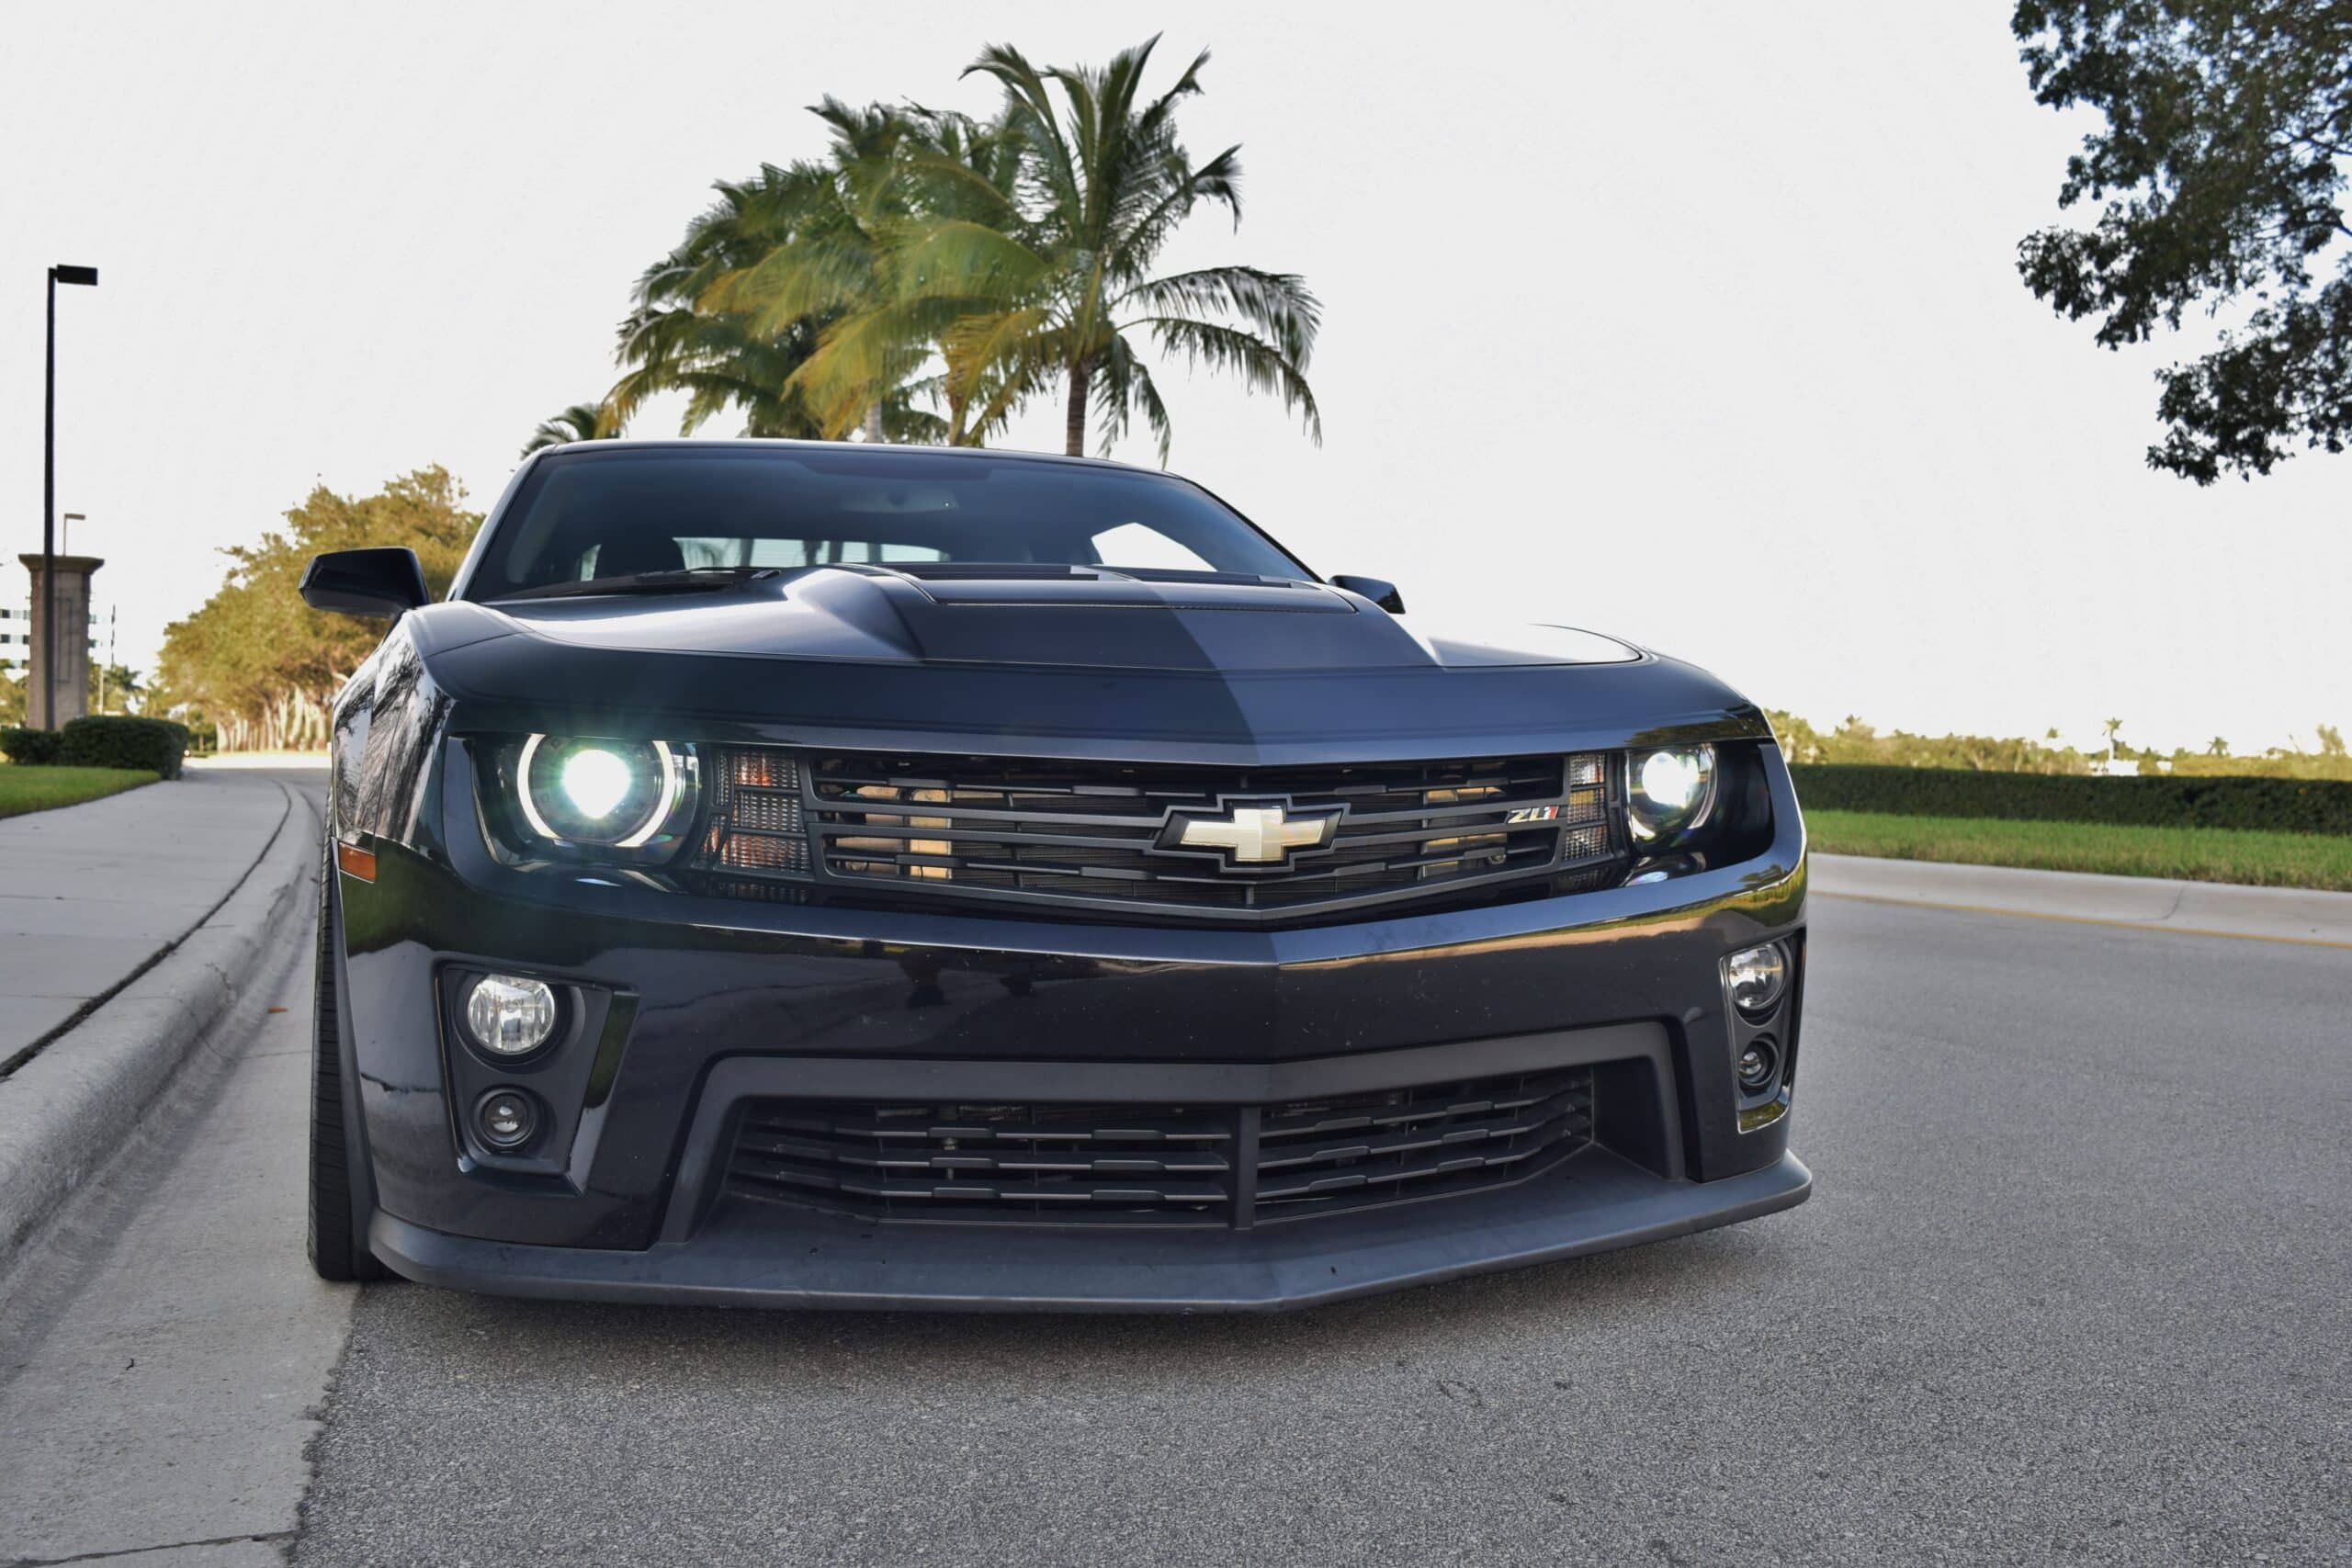 2013 Chevrolet Camaro ZL1 880 HP/LSA SUPERCHARGED – EASY 9 SEC STREET CAR – OVER $95,000 INVESTED